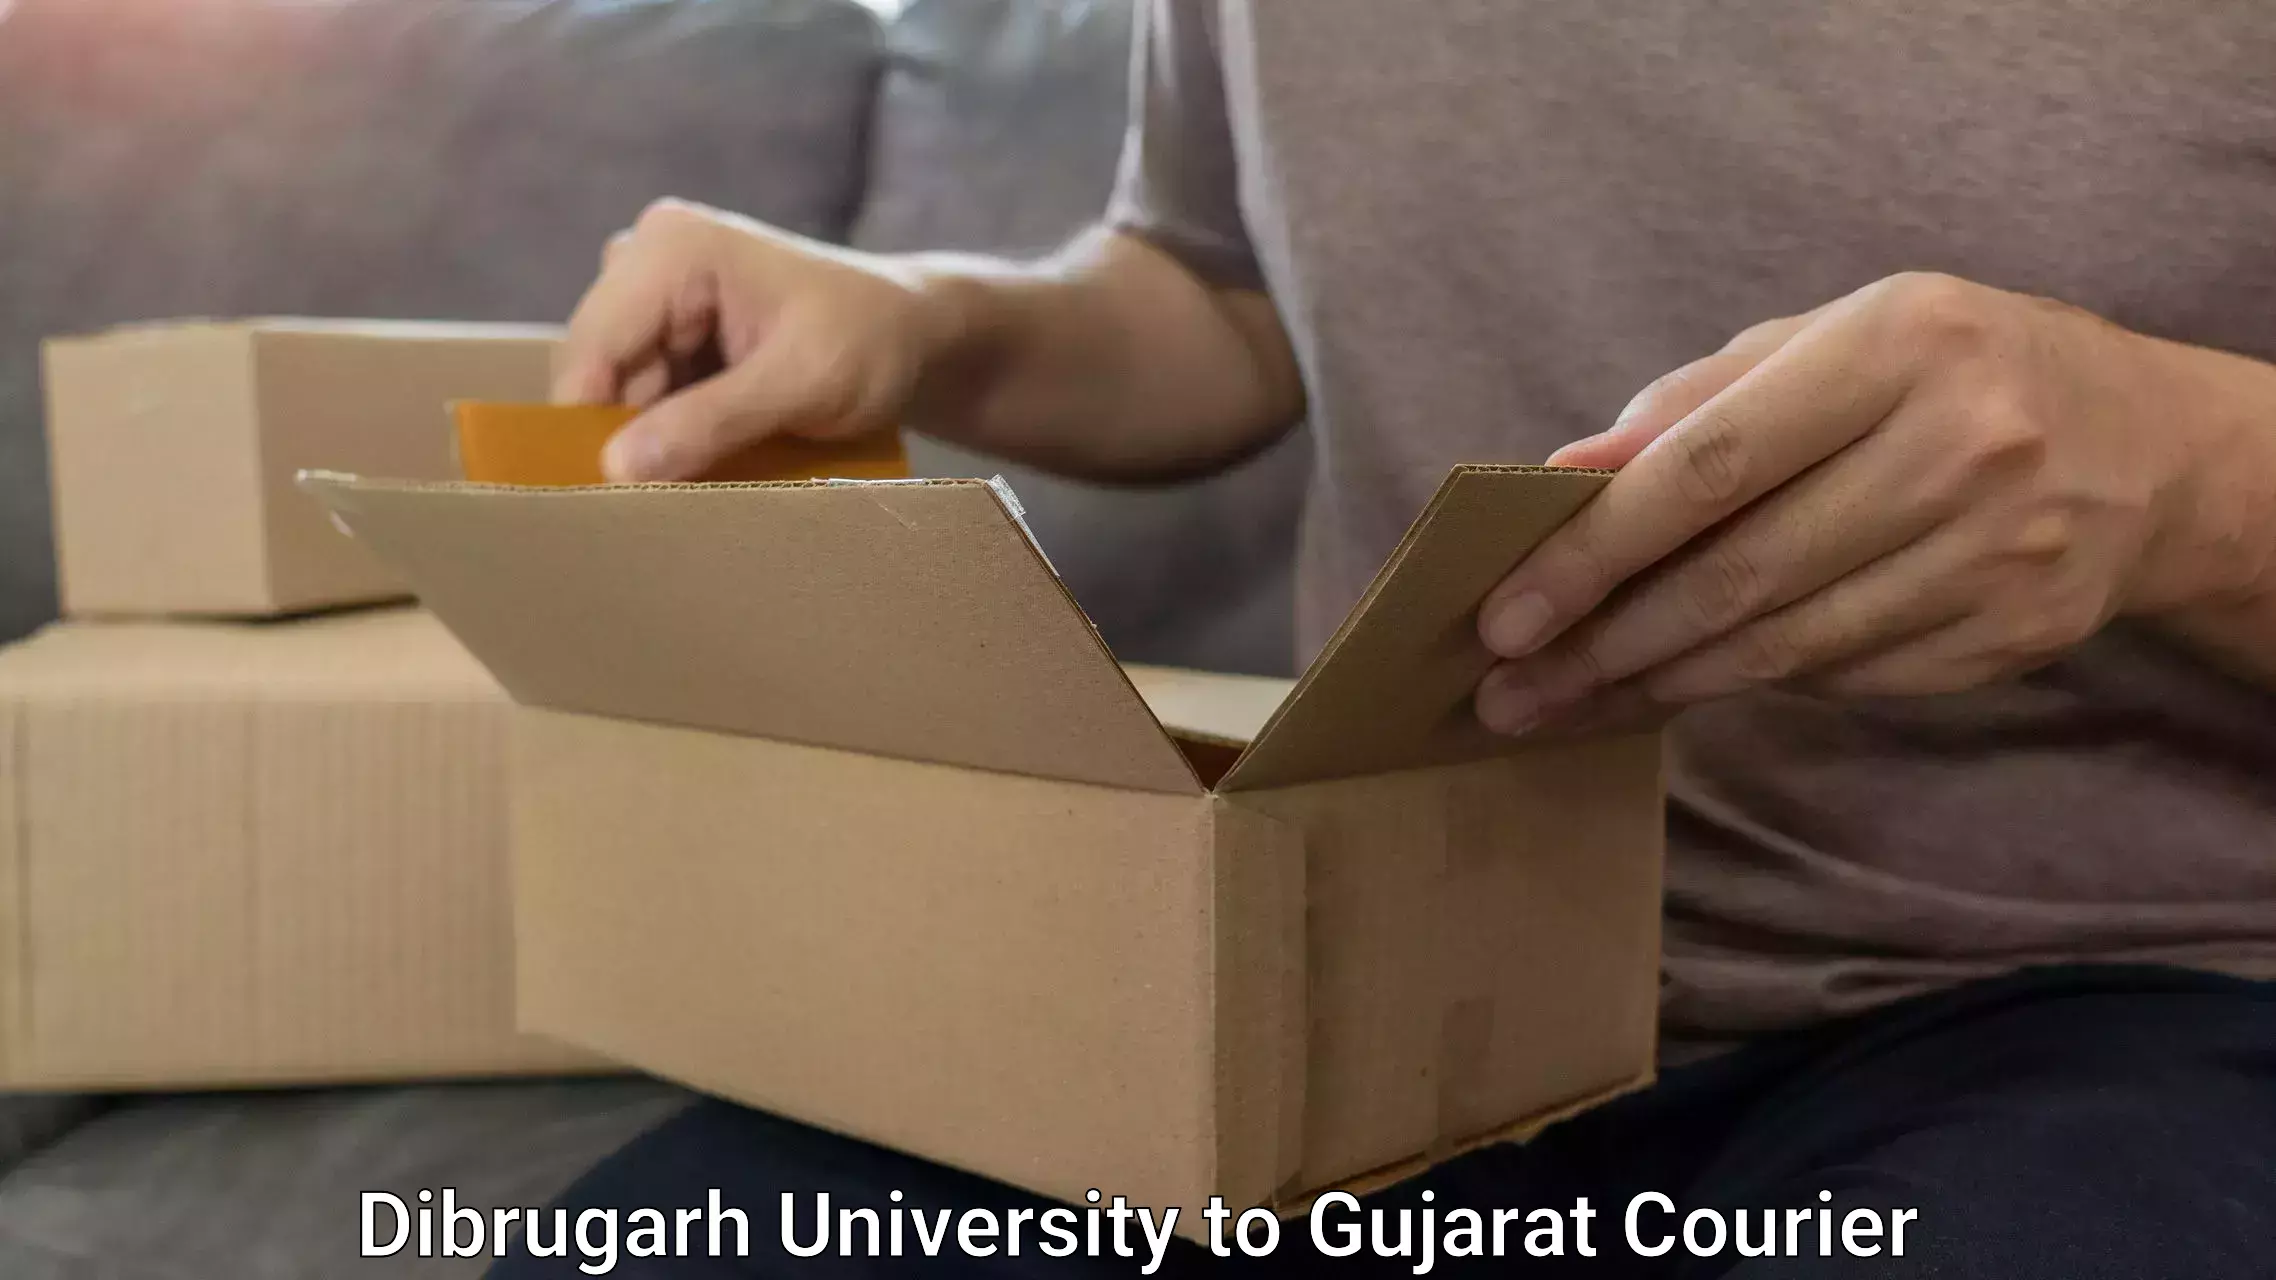 Luggage delivery providers Dibrugarh University to Dholera